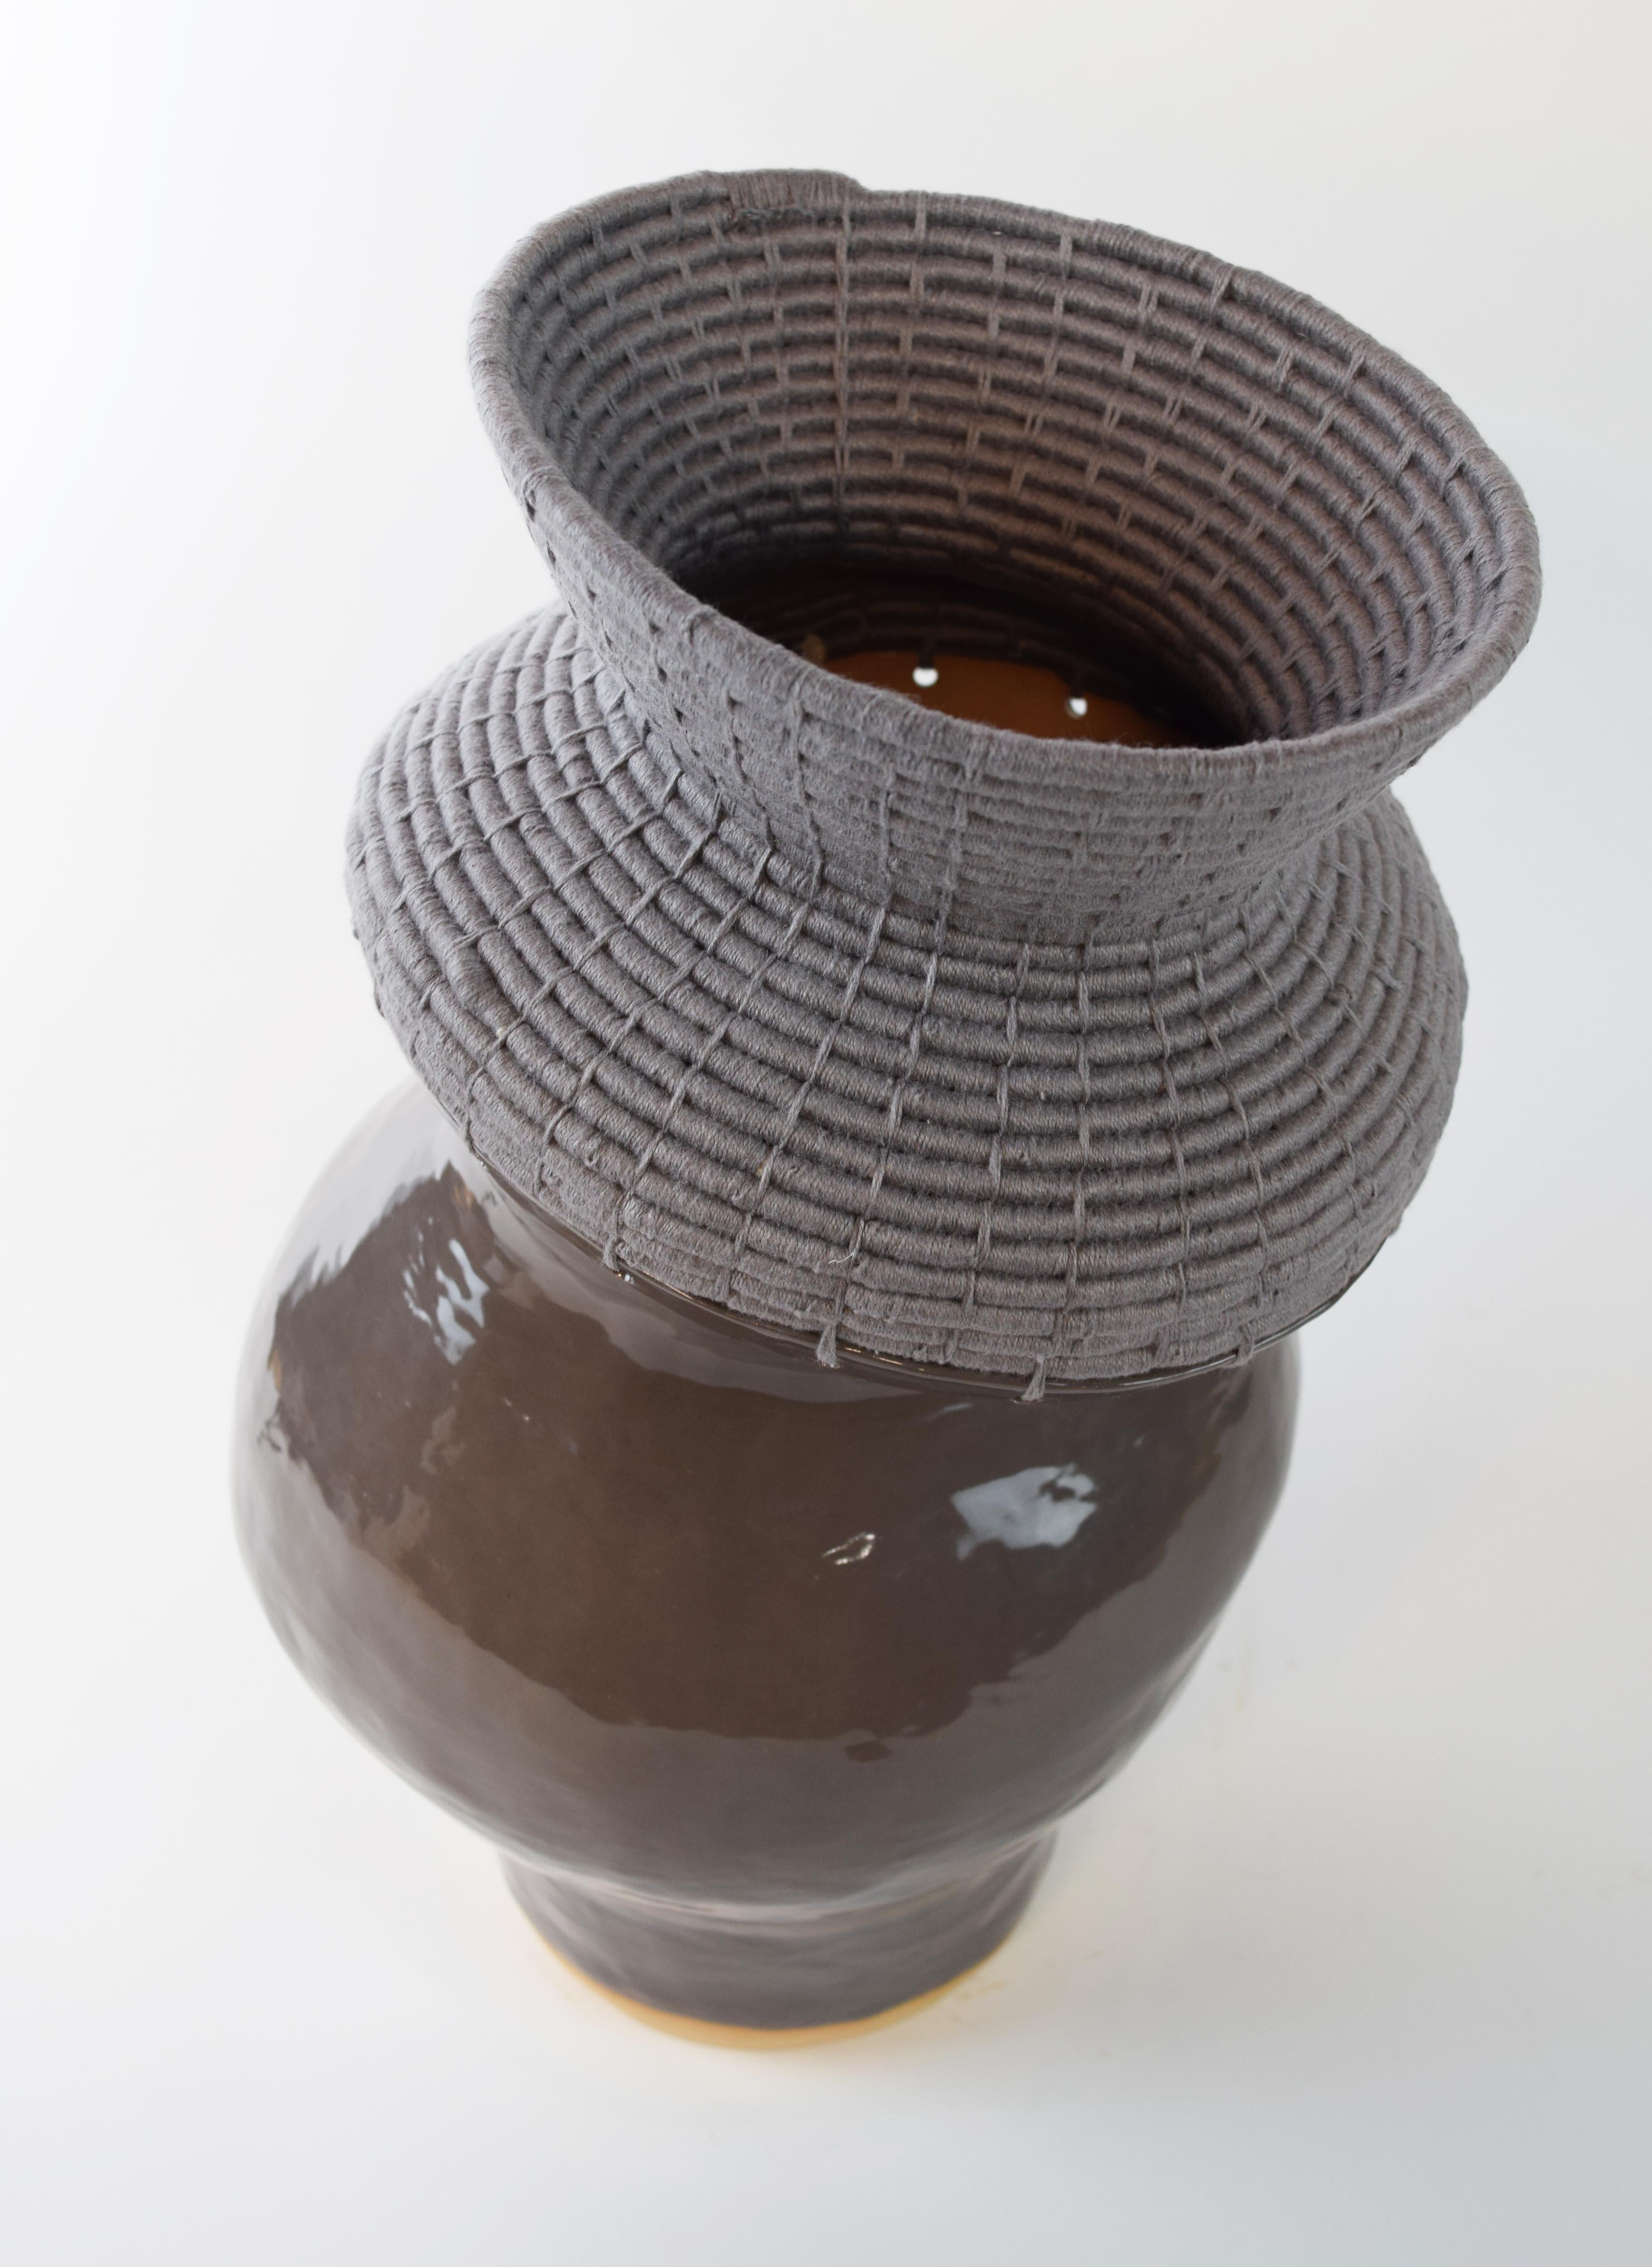 Organic Modern One of a Kind Asymmetrical Ceramic Vessel #772, Charcoal Glaze Woven Gray Cotton For Sale